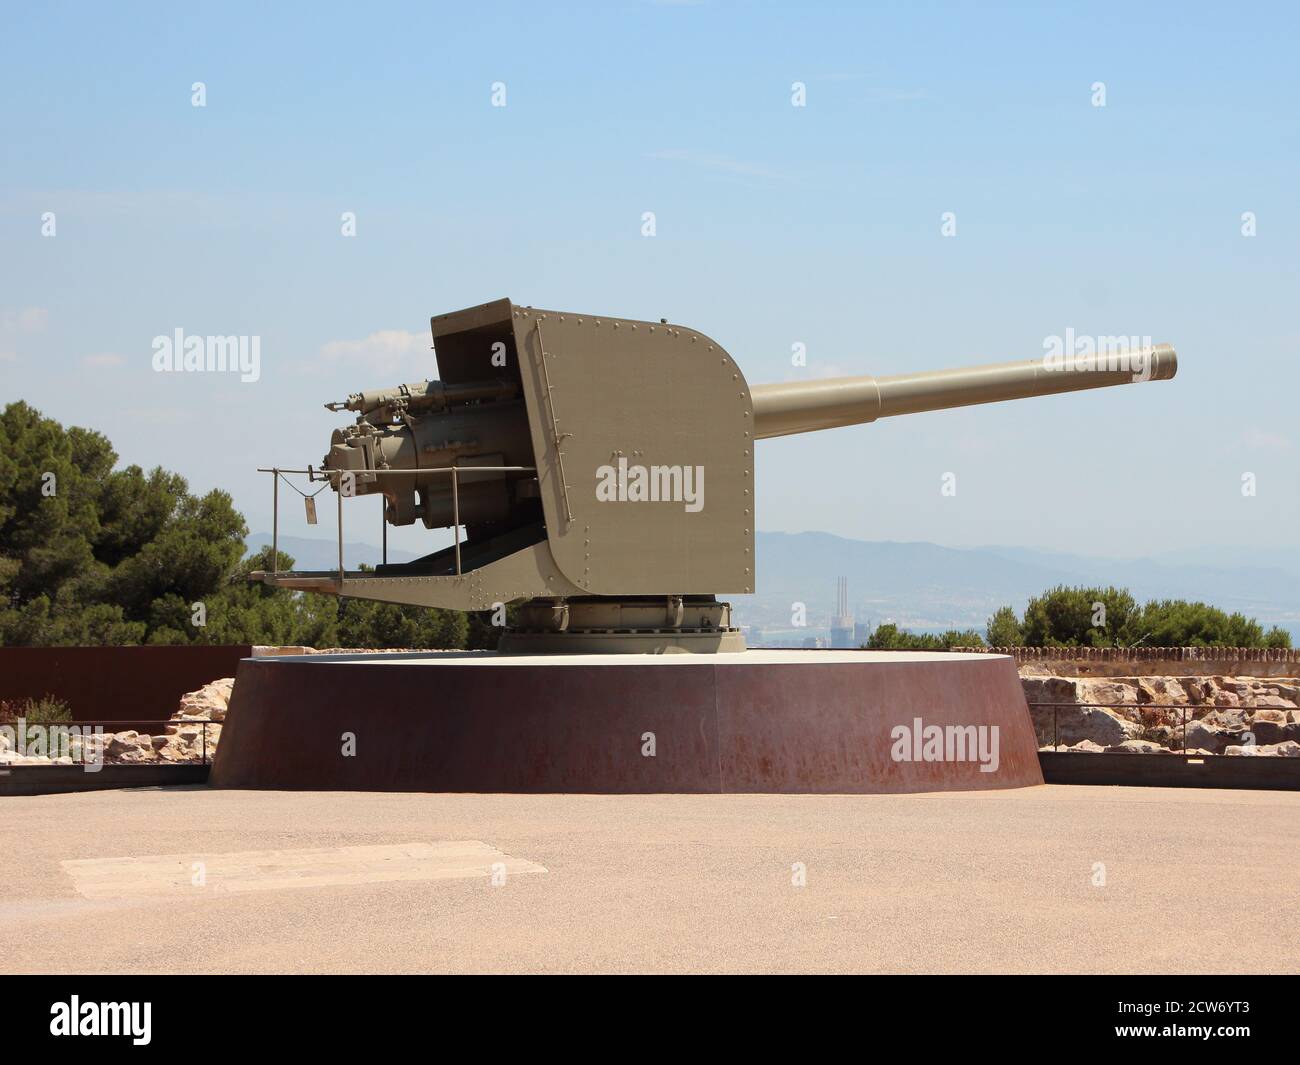 Old military cannon at Montjuïc Castle in Barcelona Spain pointing to the right. Clear blue sky with city in the background. Stock Photo